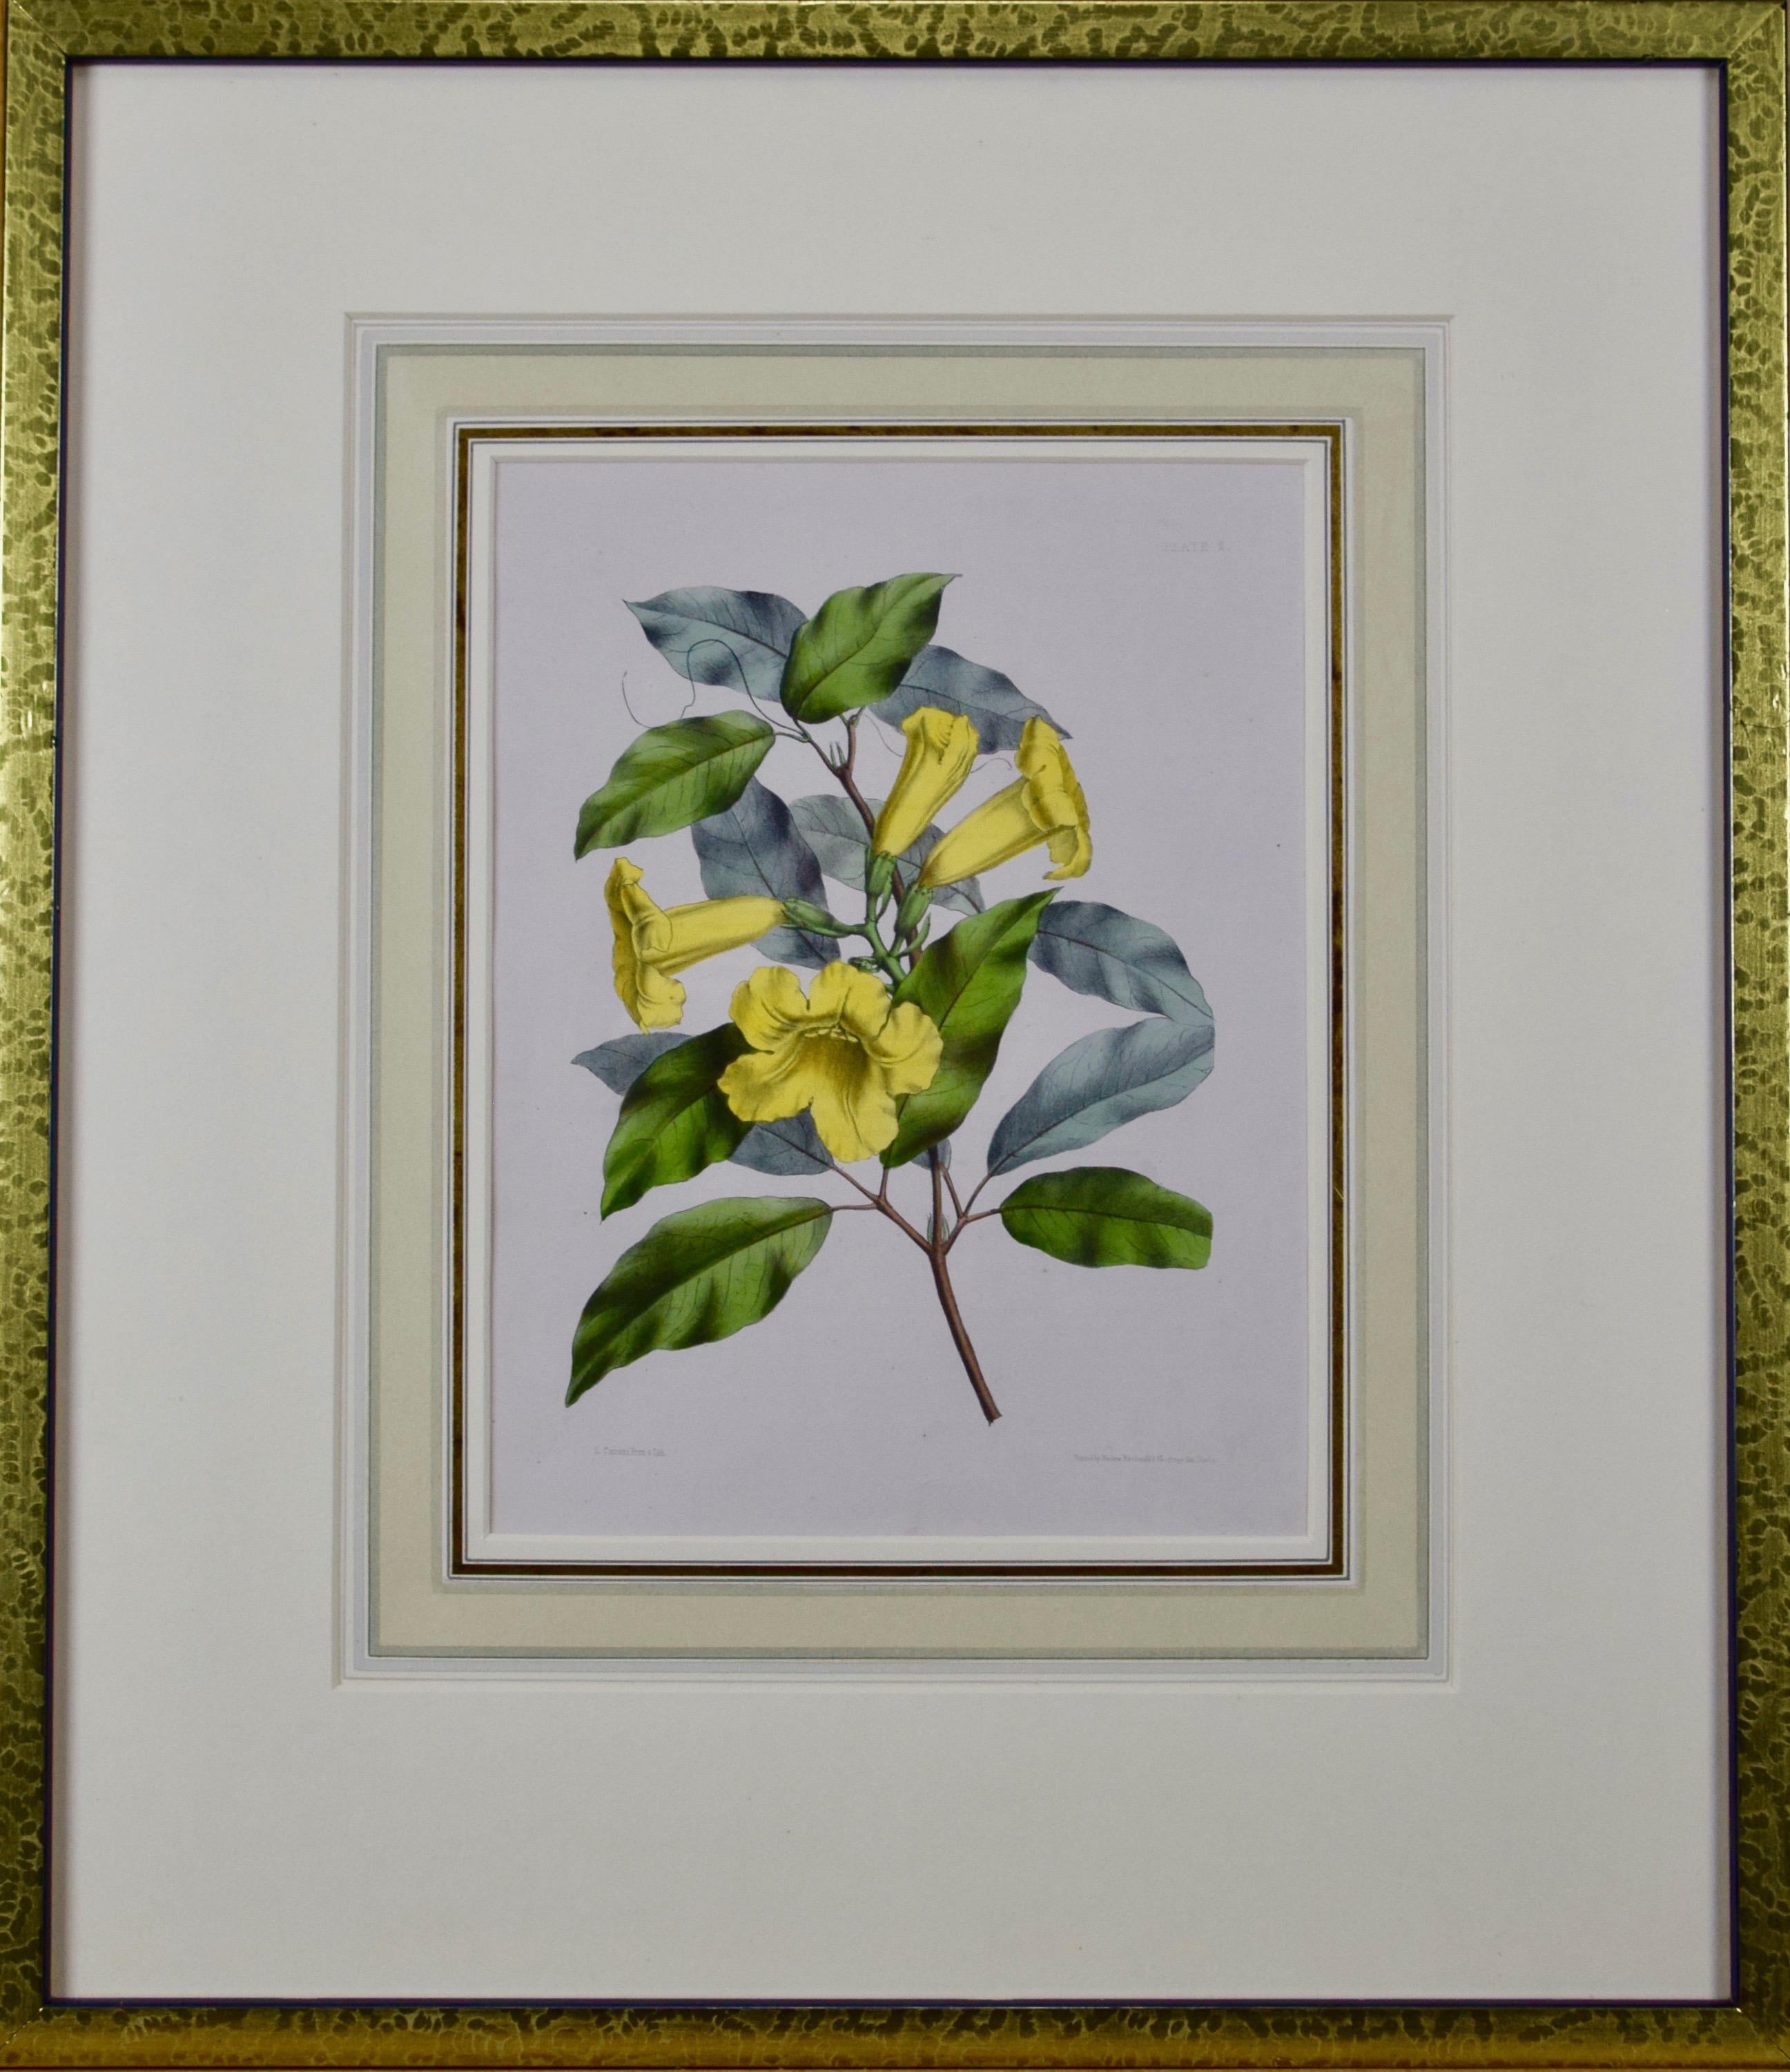 Hand-colored 1834 Joseph Paxton Botanical Engraving of Yellow Trumpet Flowers